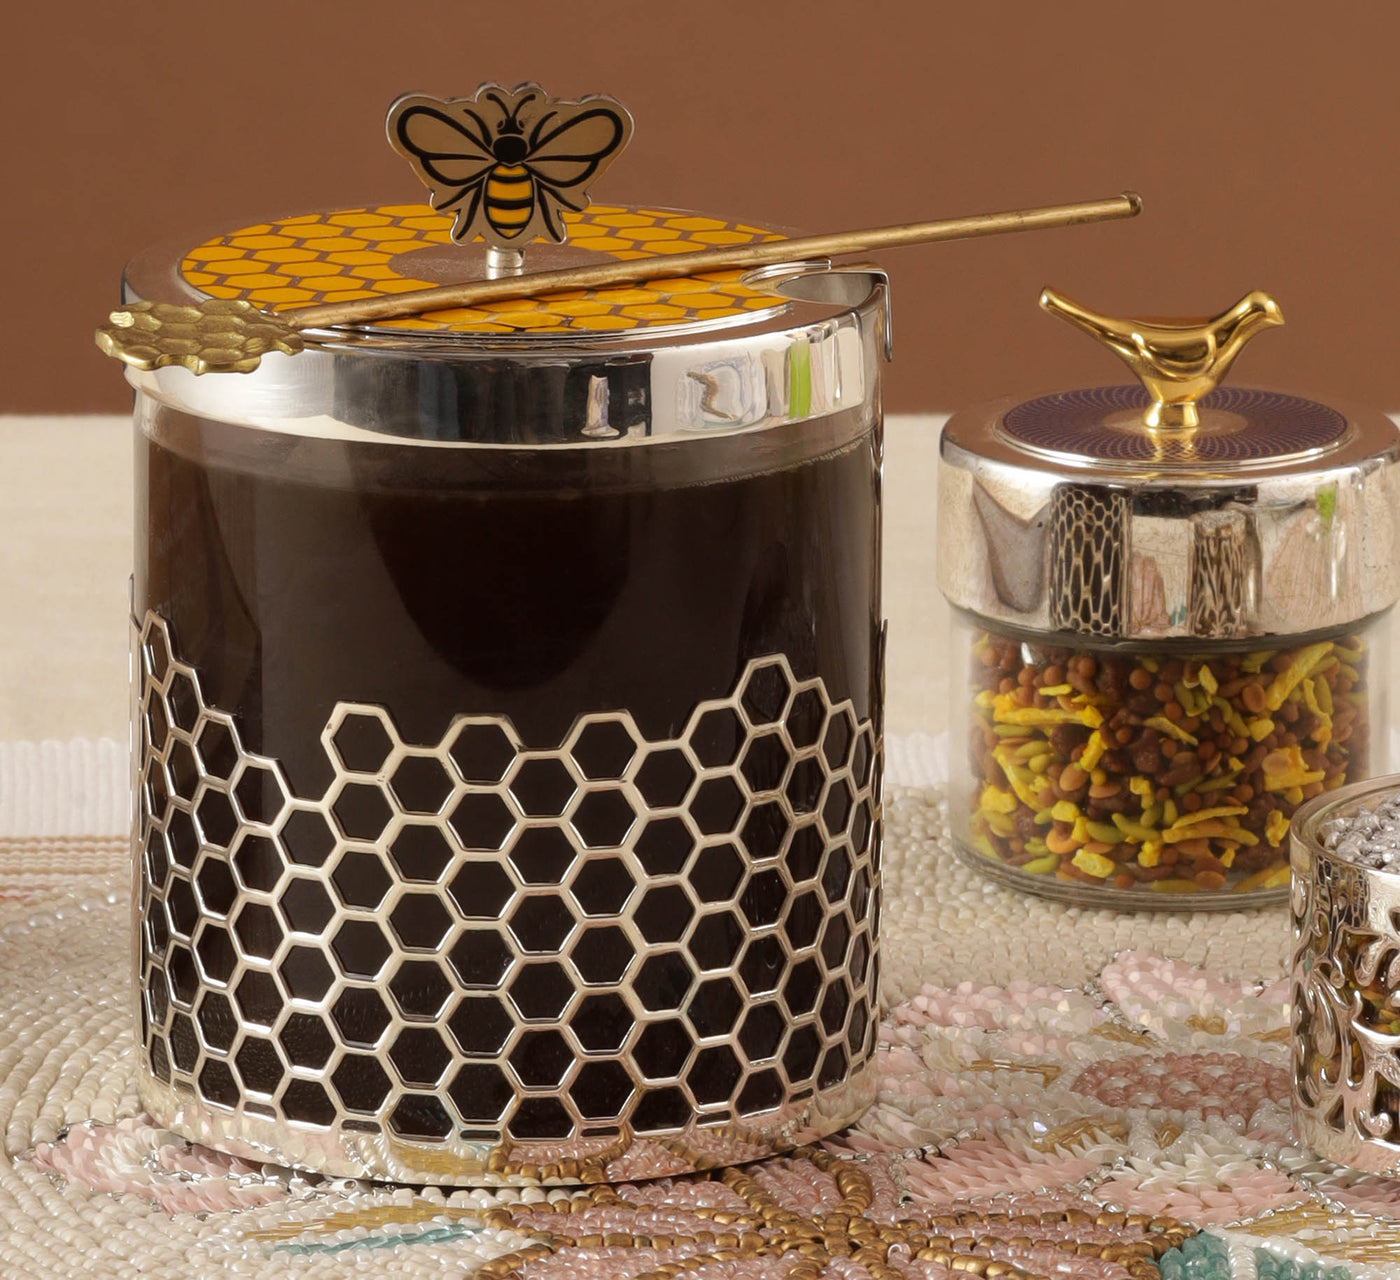 Wild Hives Honey Jar with Silver-Plated Lid